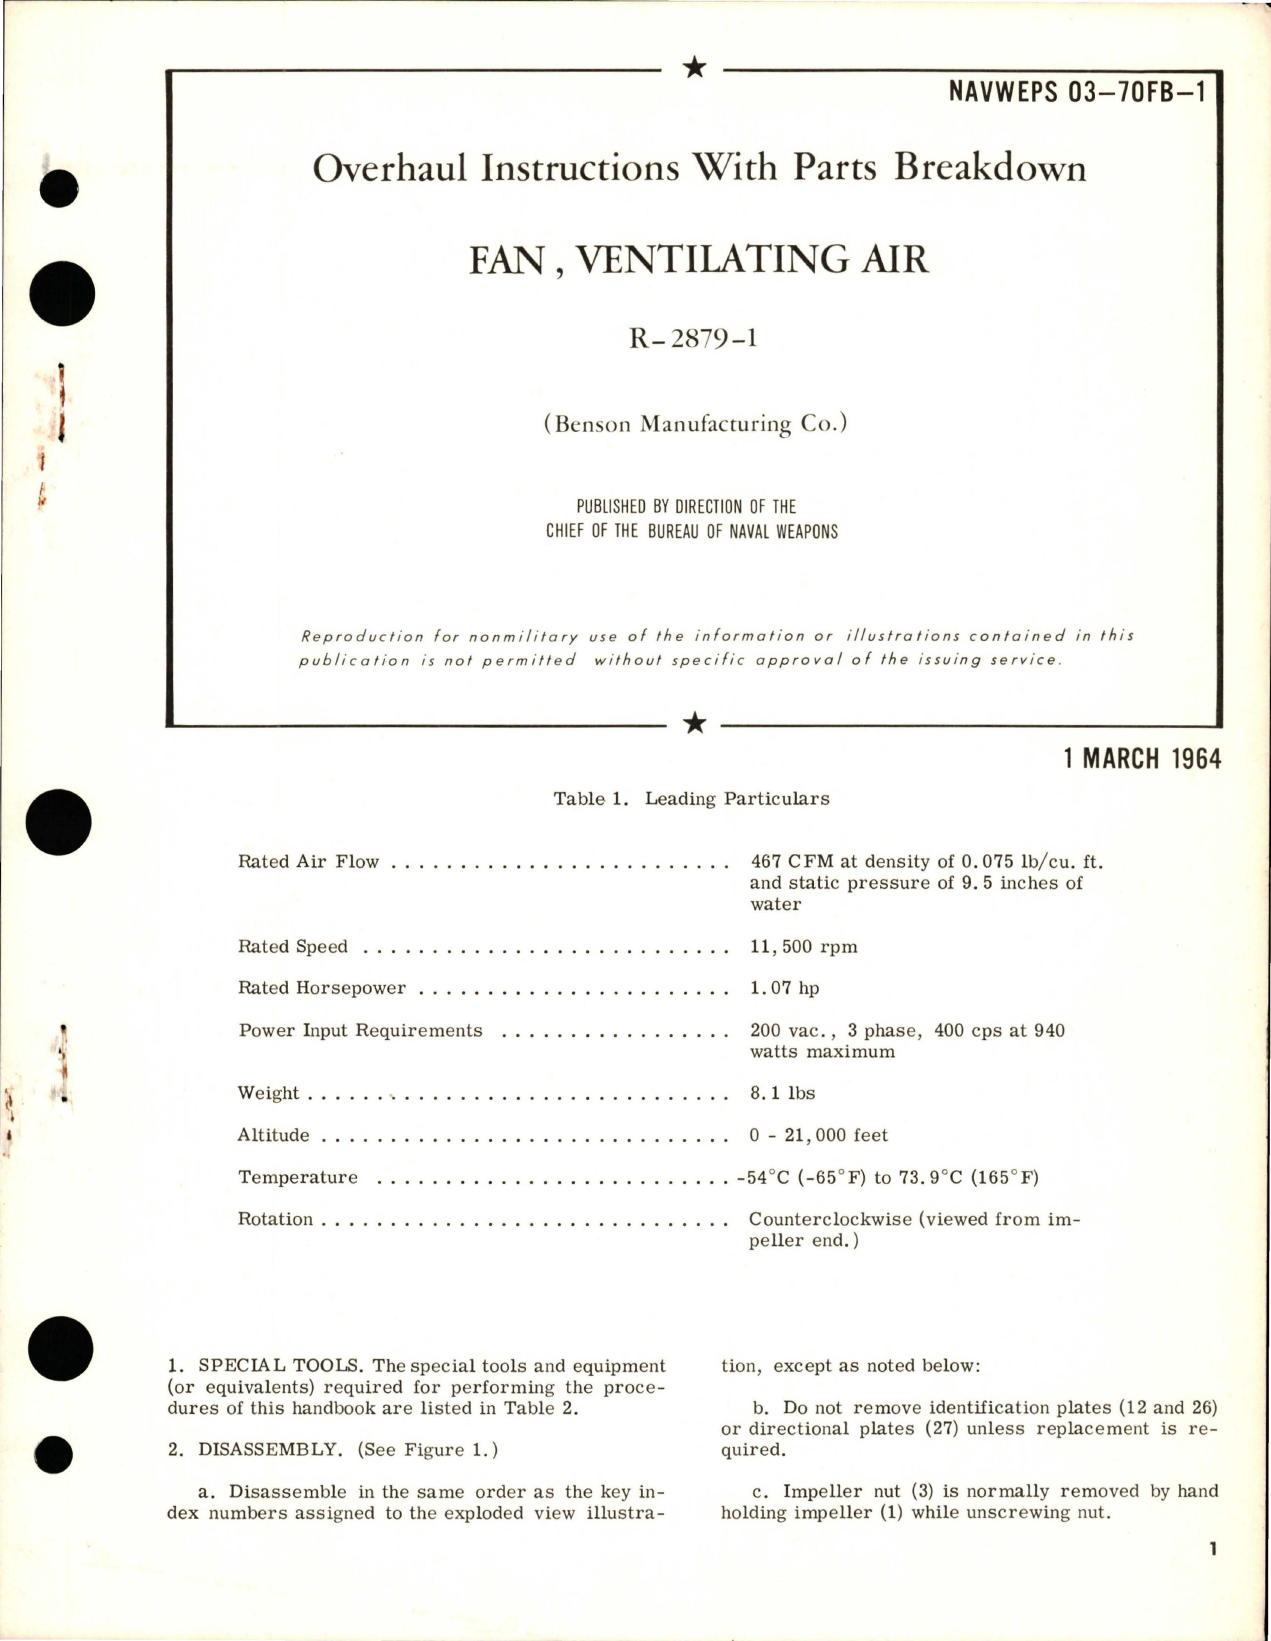 Sample page 1 from AirCorps Library document: Overhaul Instructions with Parts Breakdown for Ventilating Air Fan - R-2879-1 